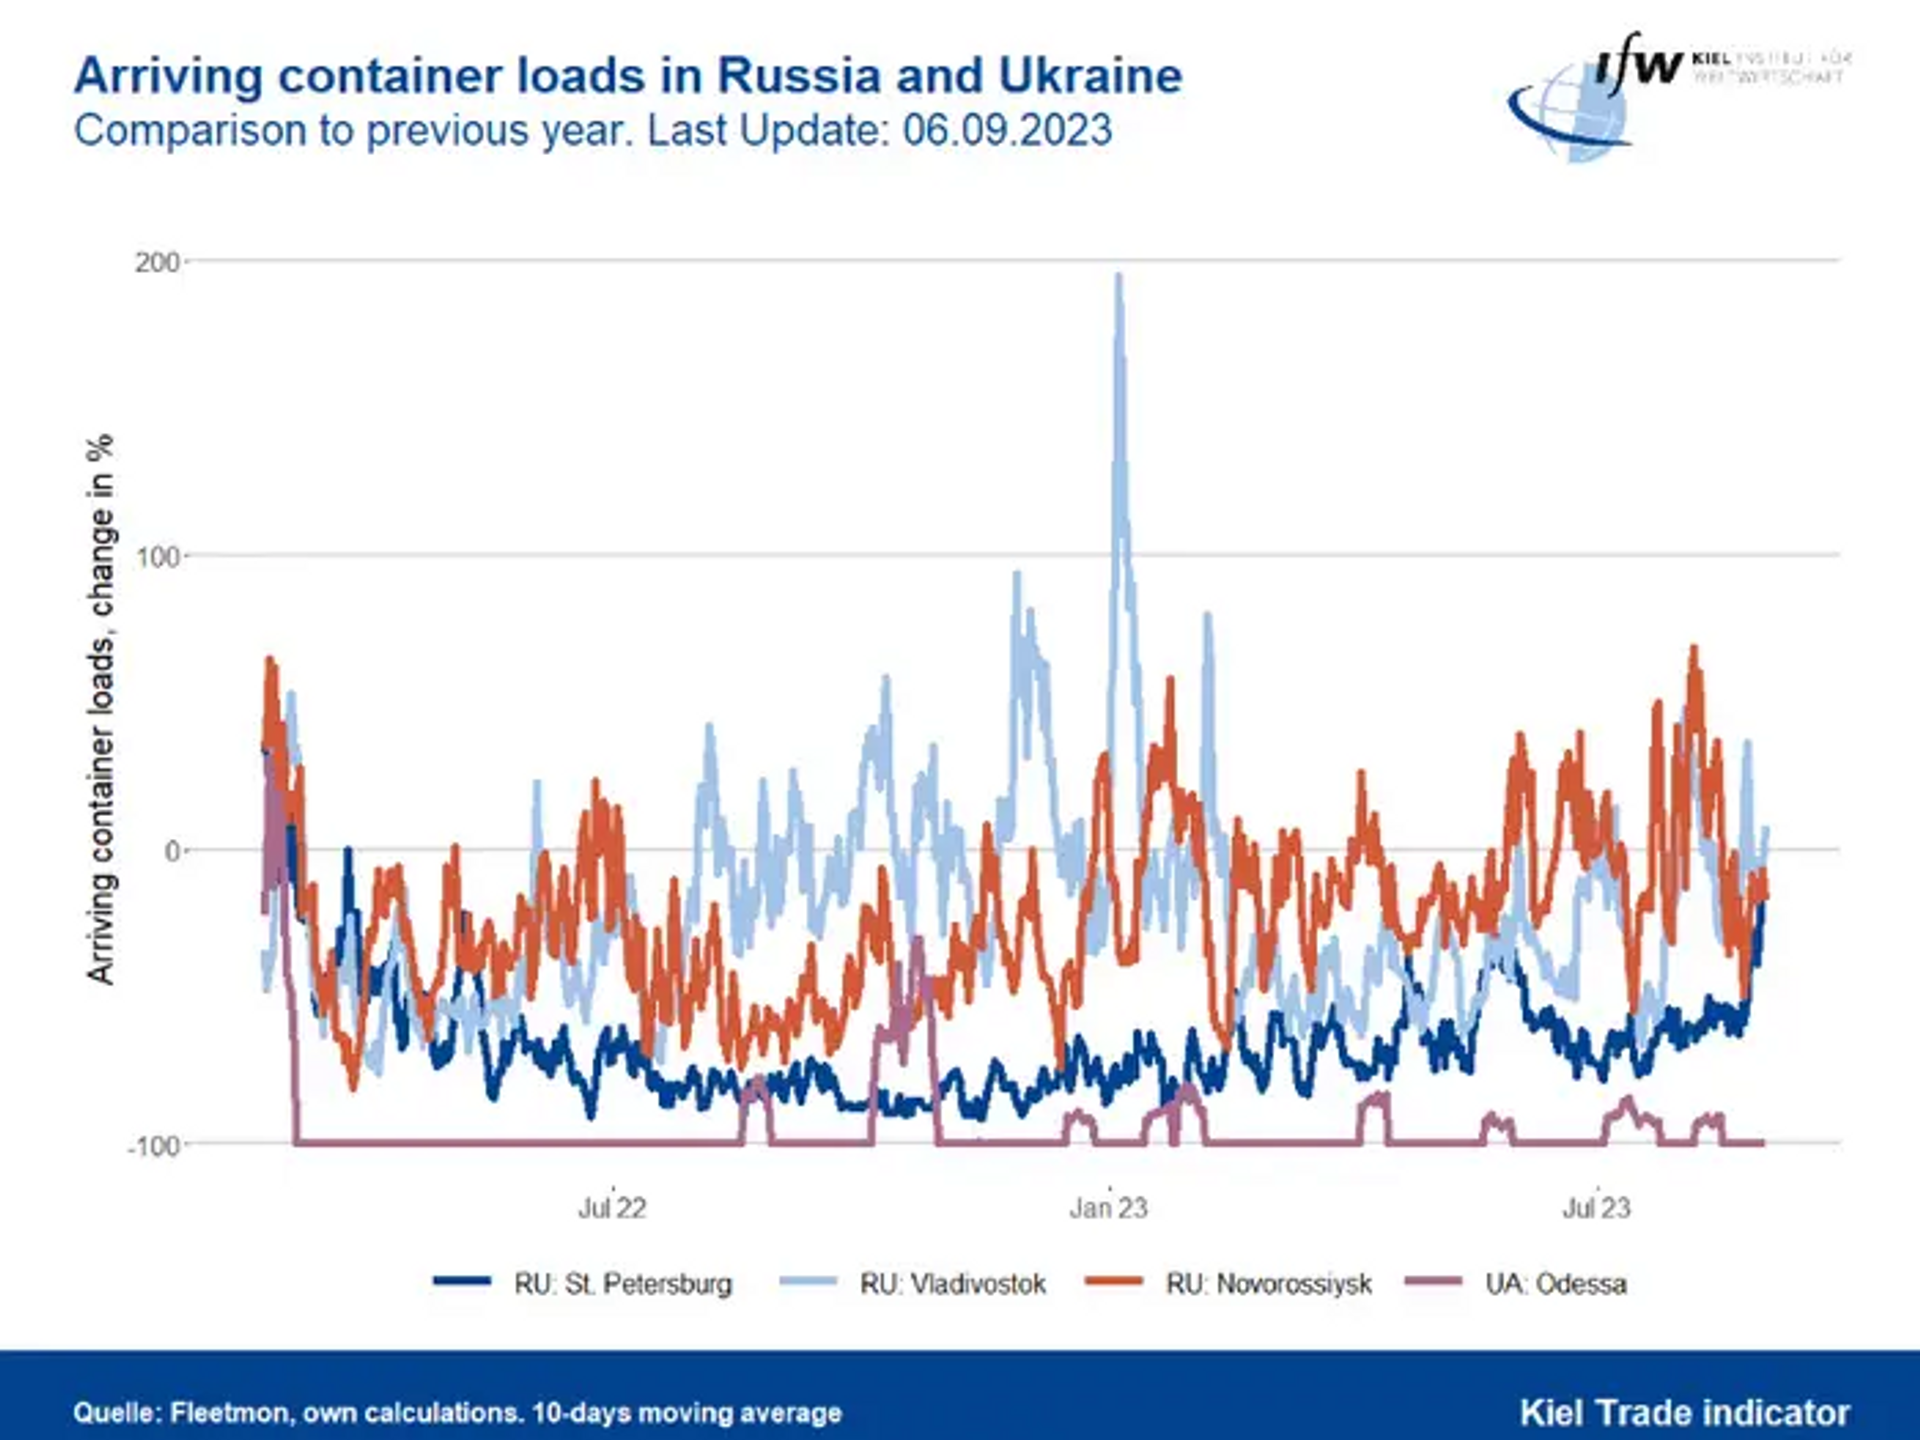 Kiel Institute for the World Economy chart showing container loads arriving at major Russian and Ukrainian ports. - Sputnik International, 1920, 09.09.2023